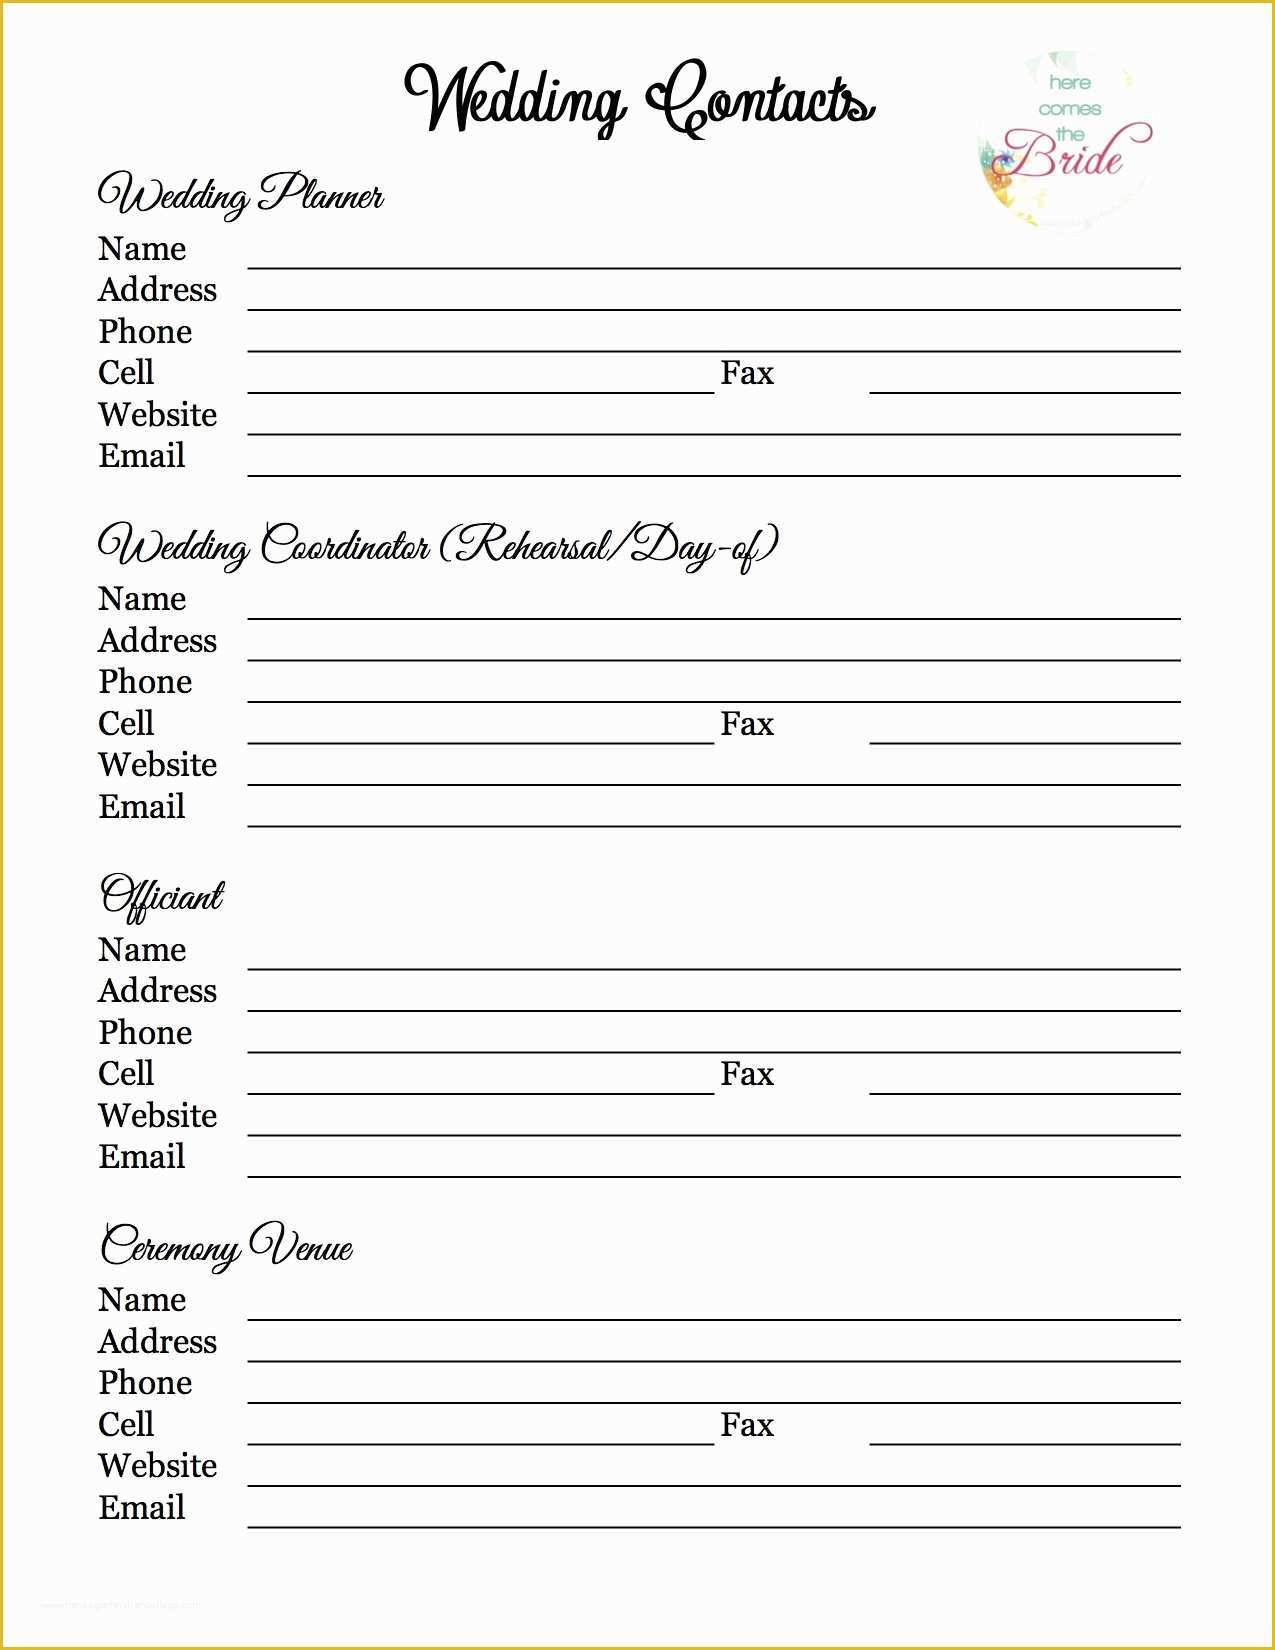 Free Printable Wedding Planning Templates Of Wedding Planner with Free